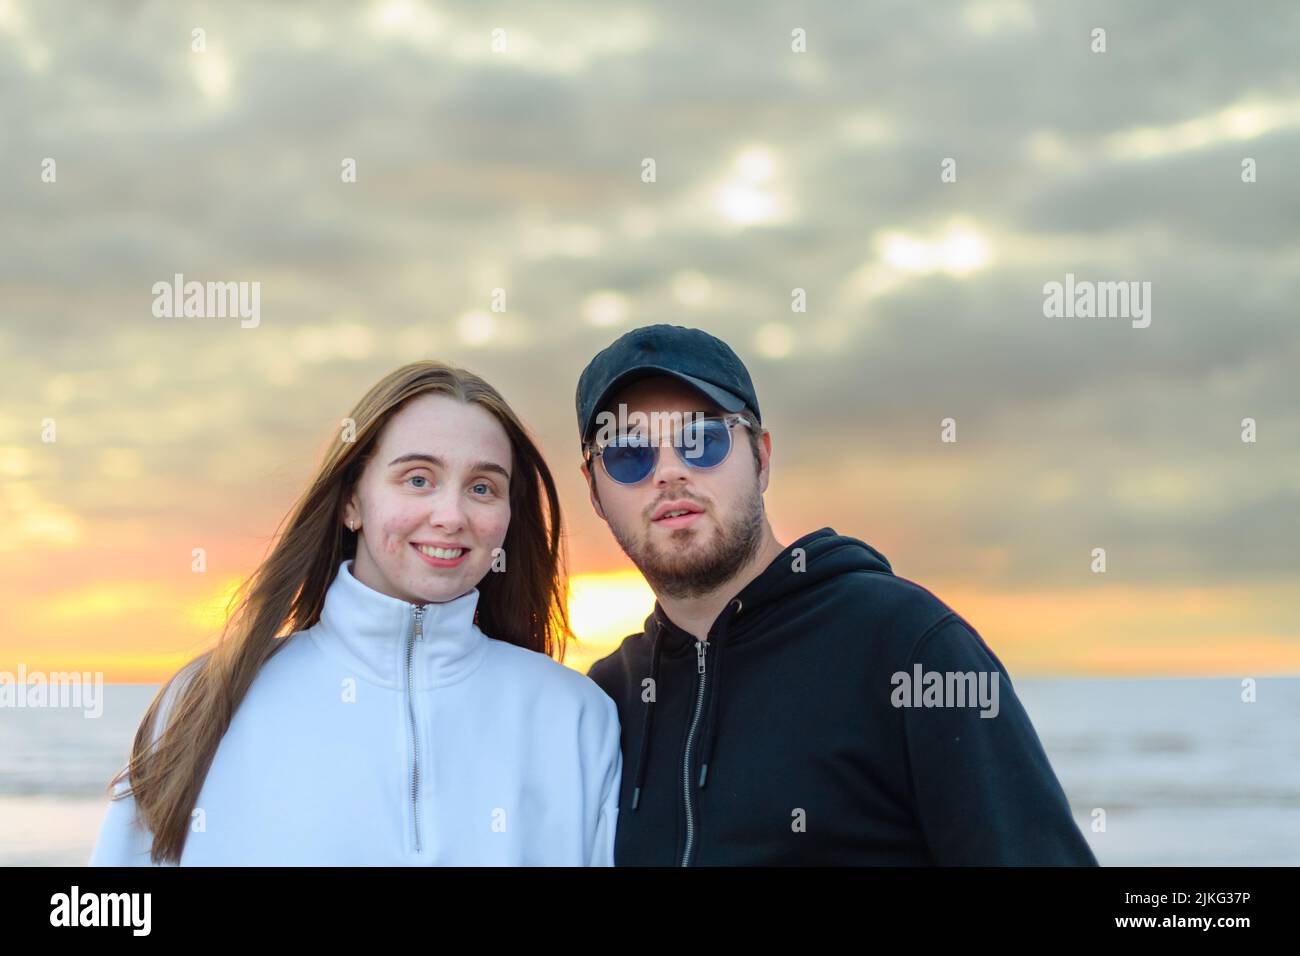 A happy young Caucasian couple posing near the sea at sunset Stock Photo